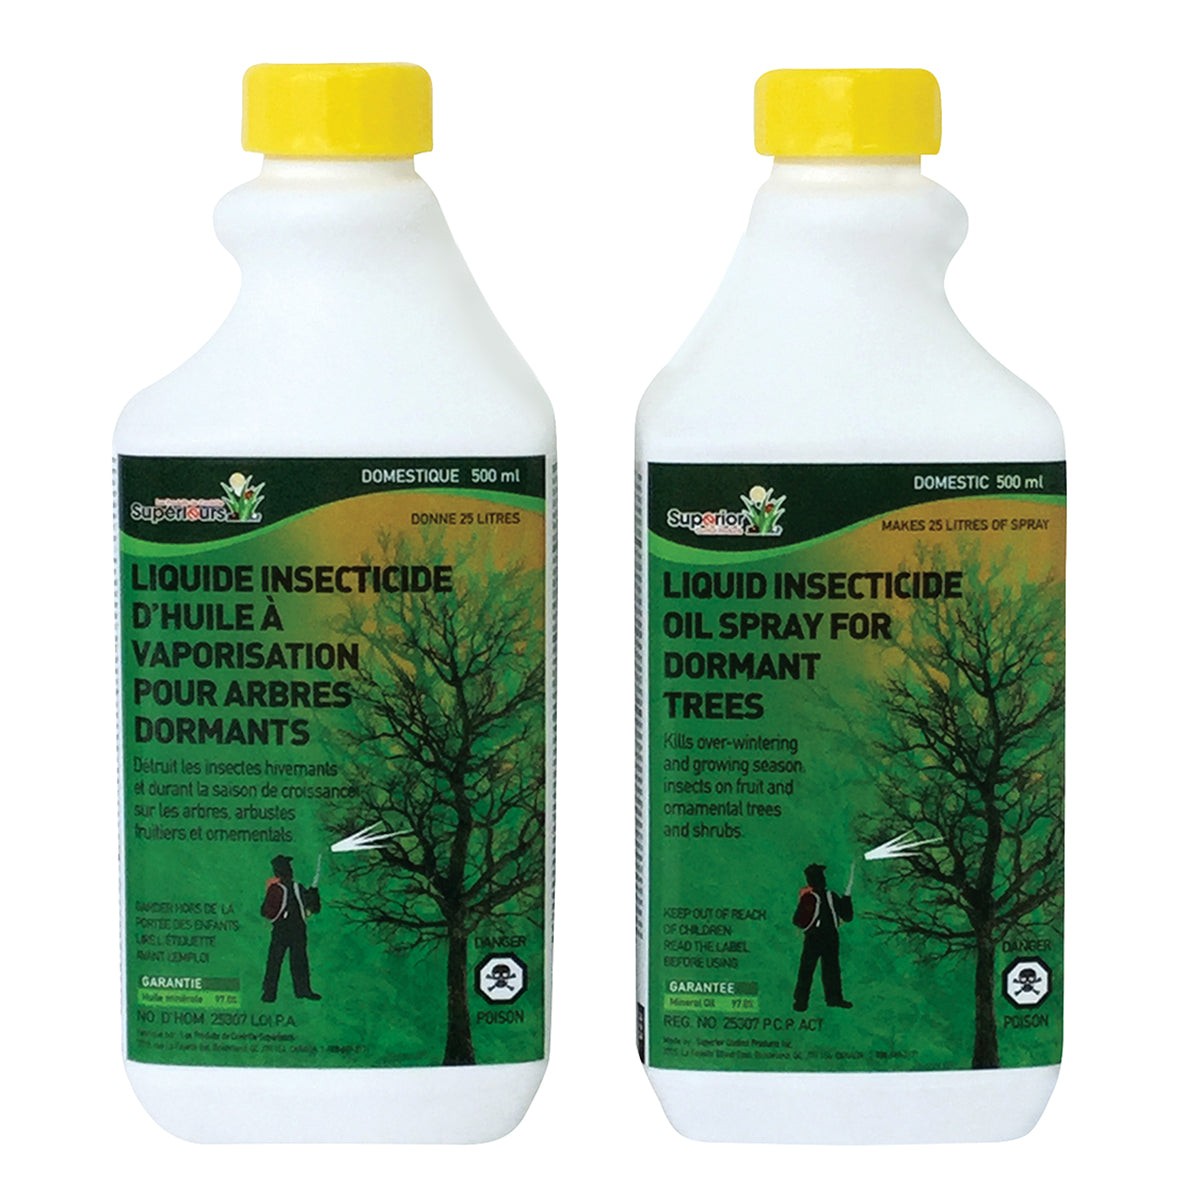 Liquid insecticide oil spray for dormant trees